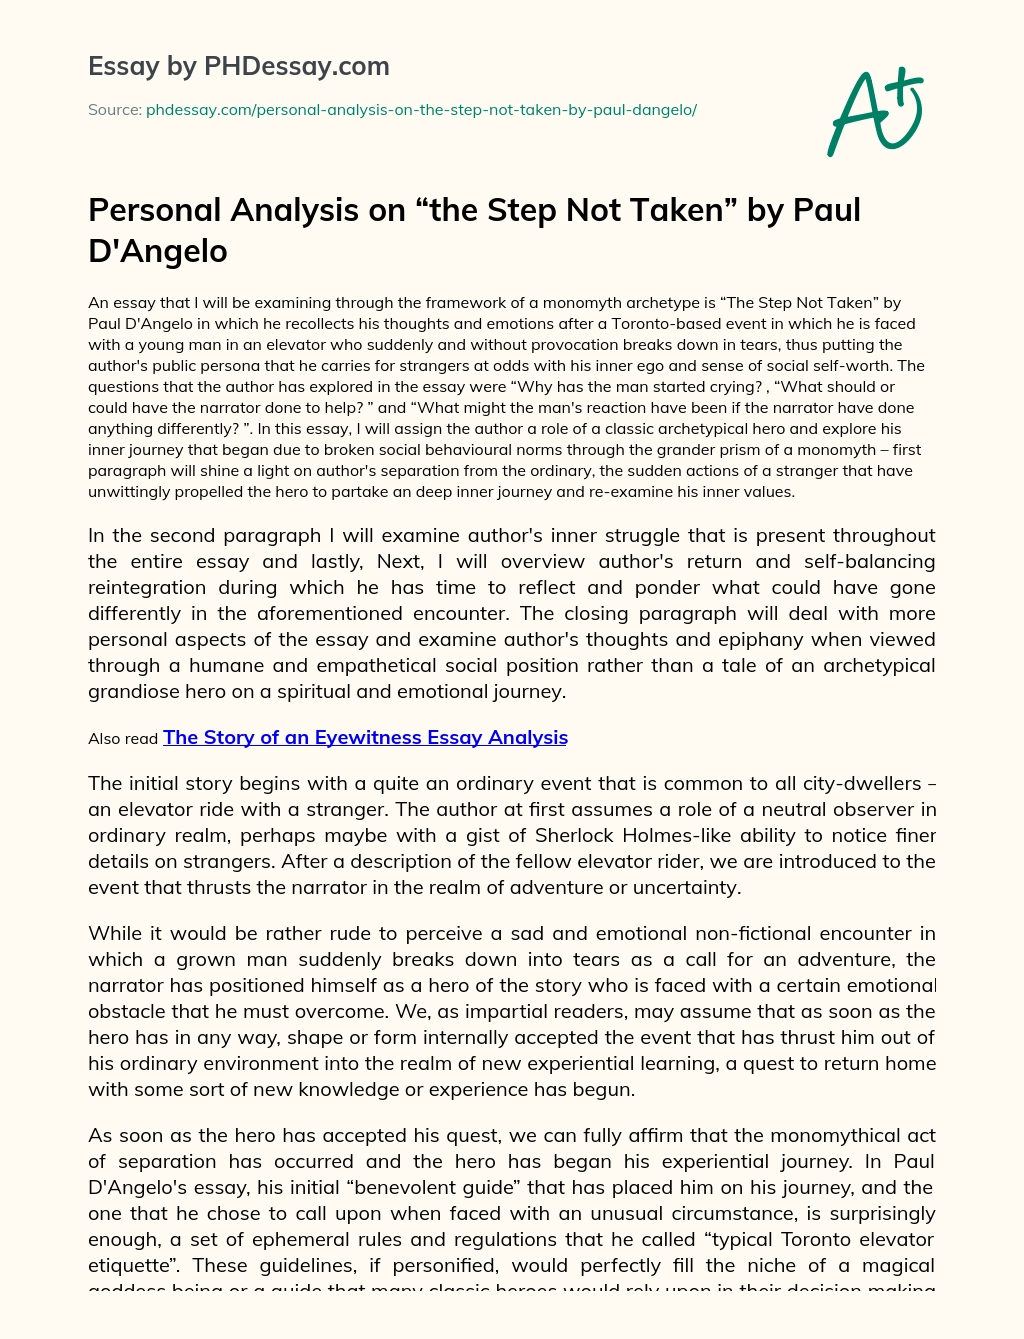 Personal Analysis on “the Step Not Taken” by Paul D’Angelo essay